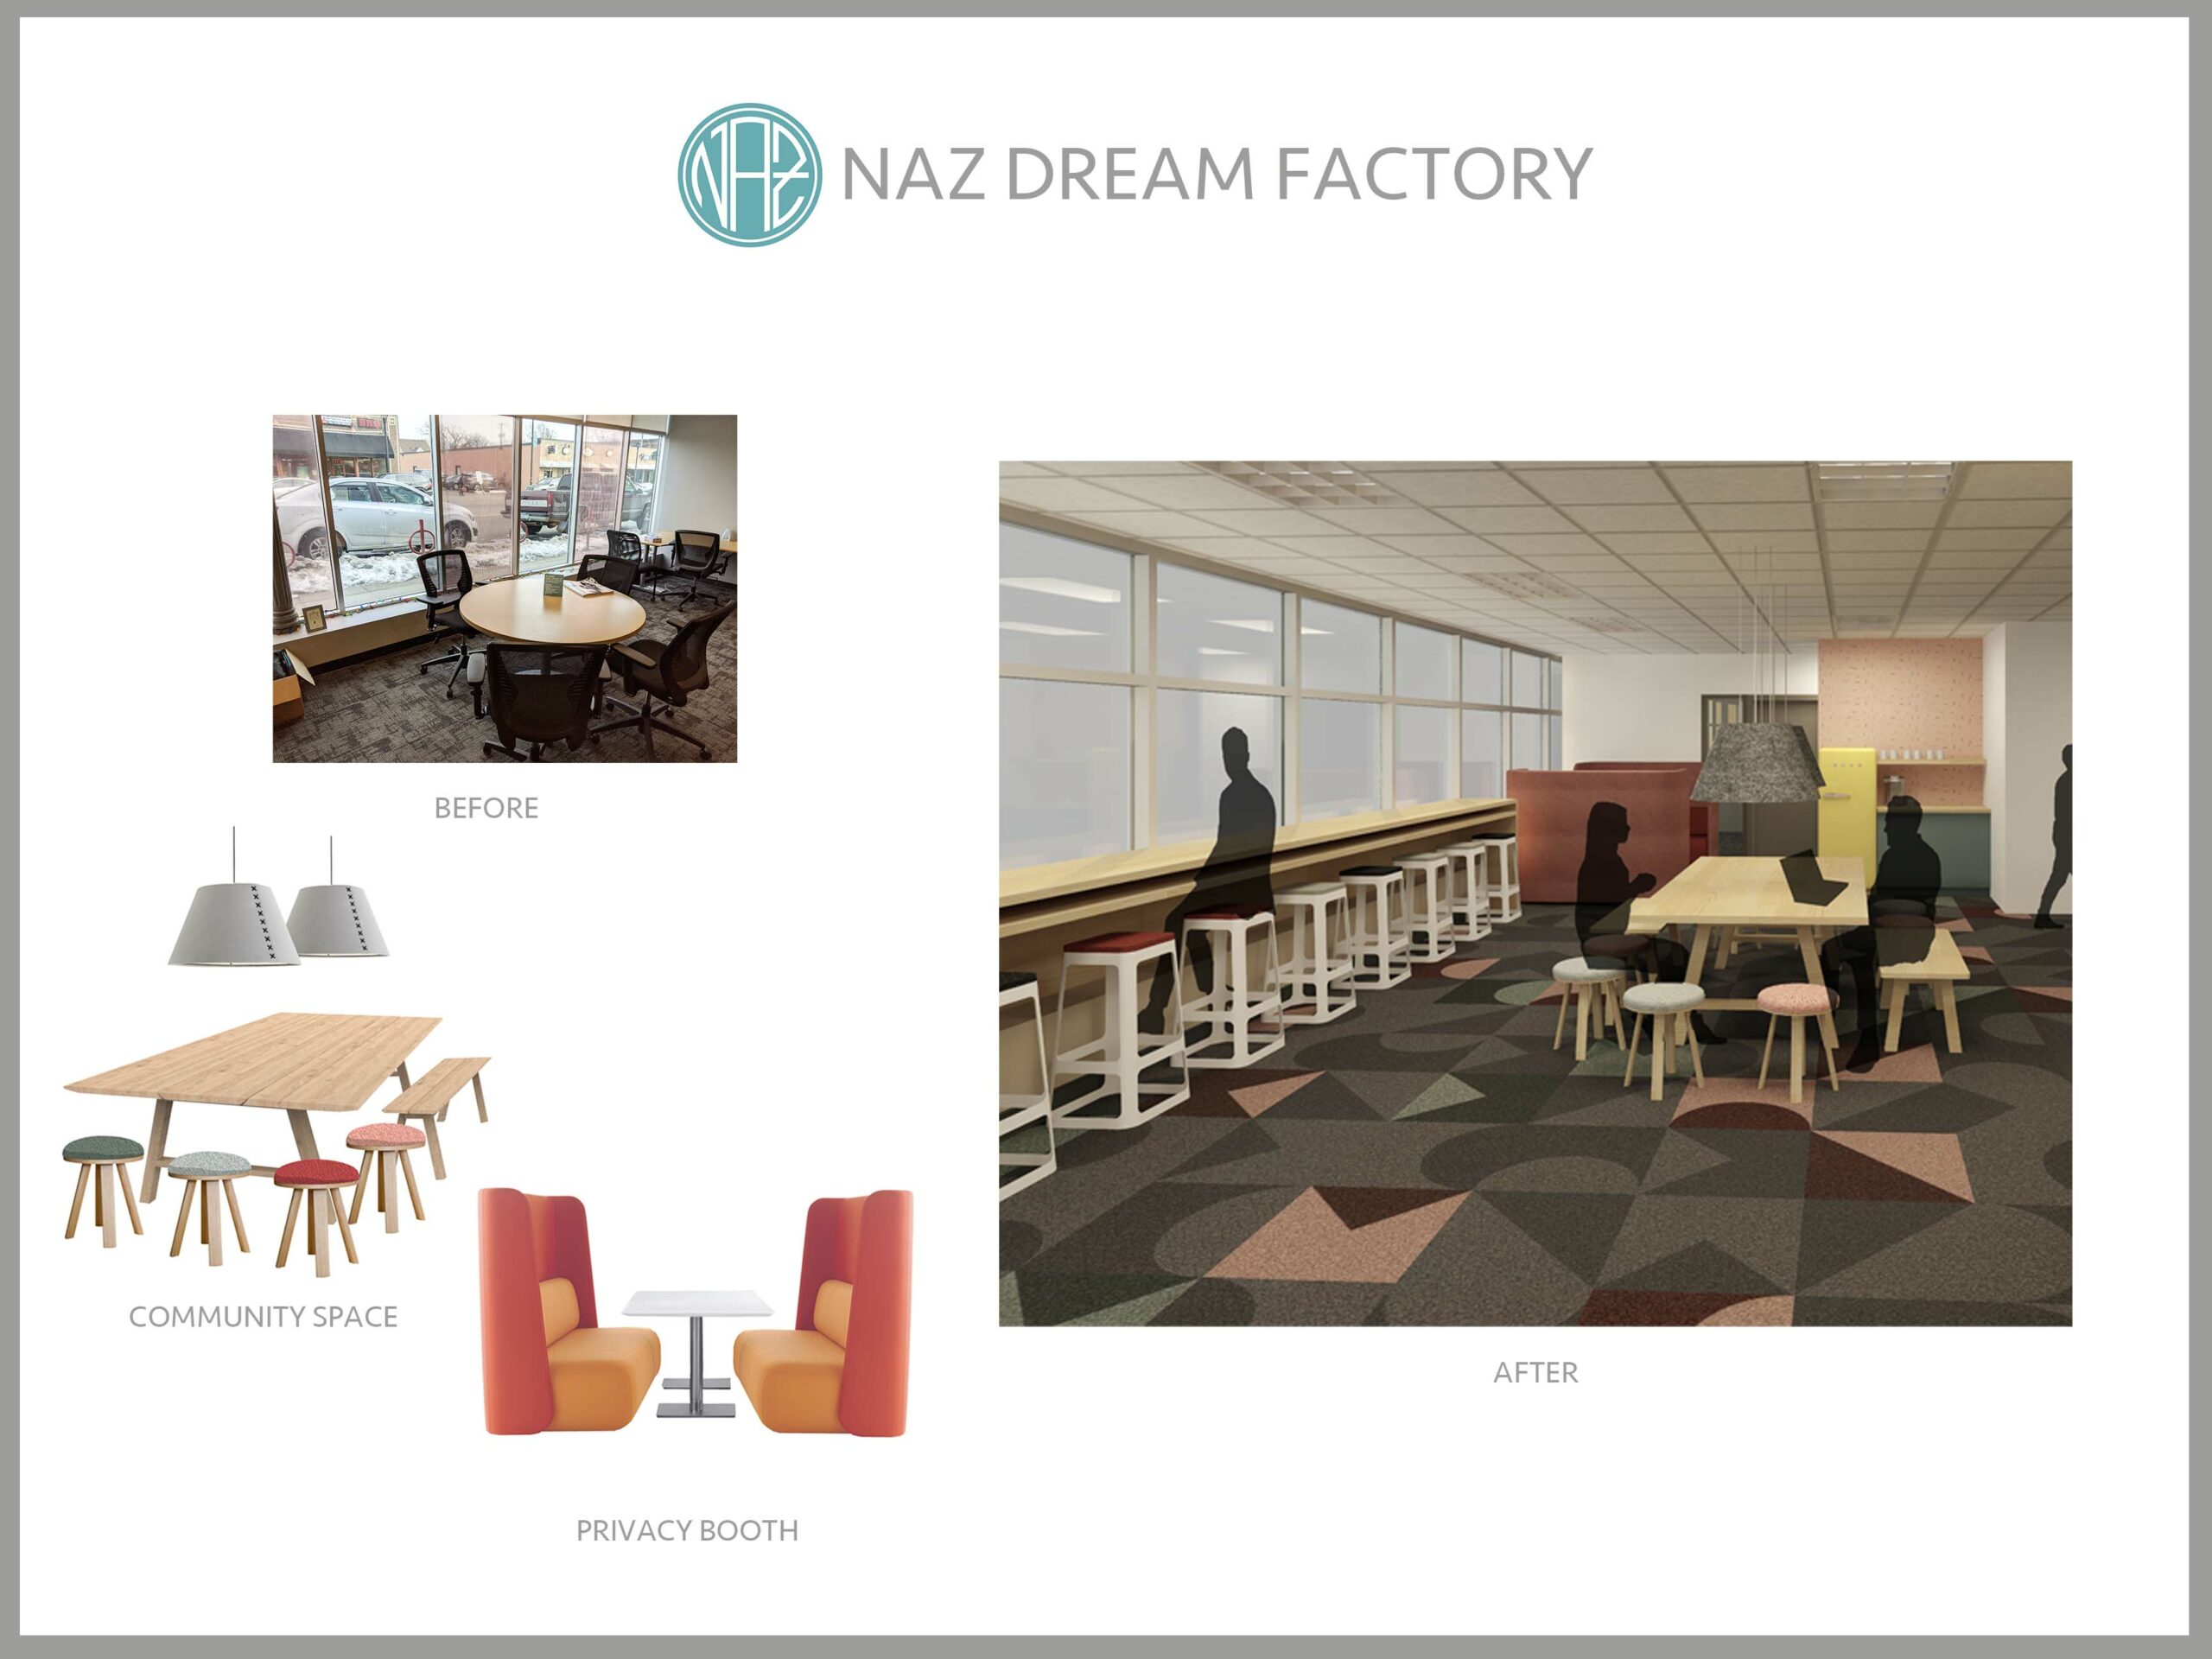 Naz and Design for A Difference